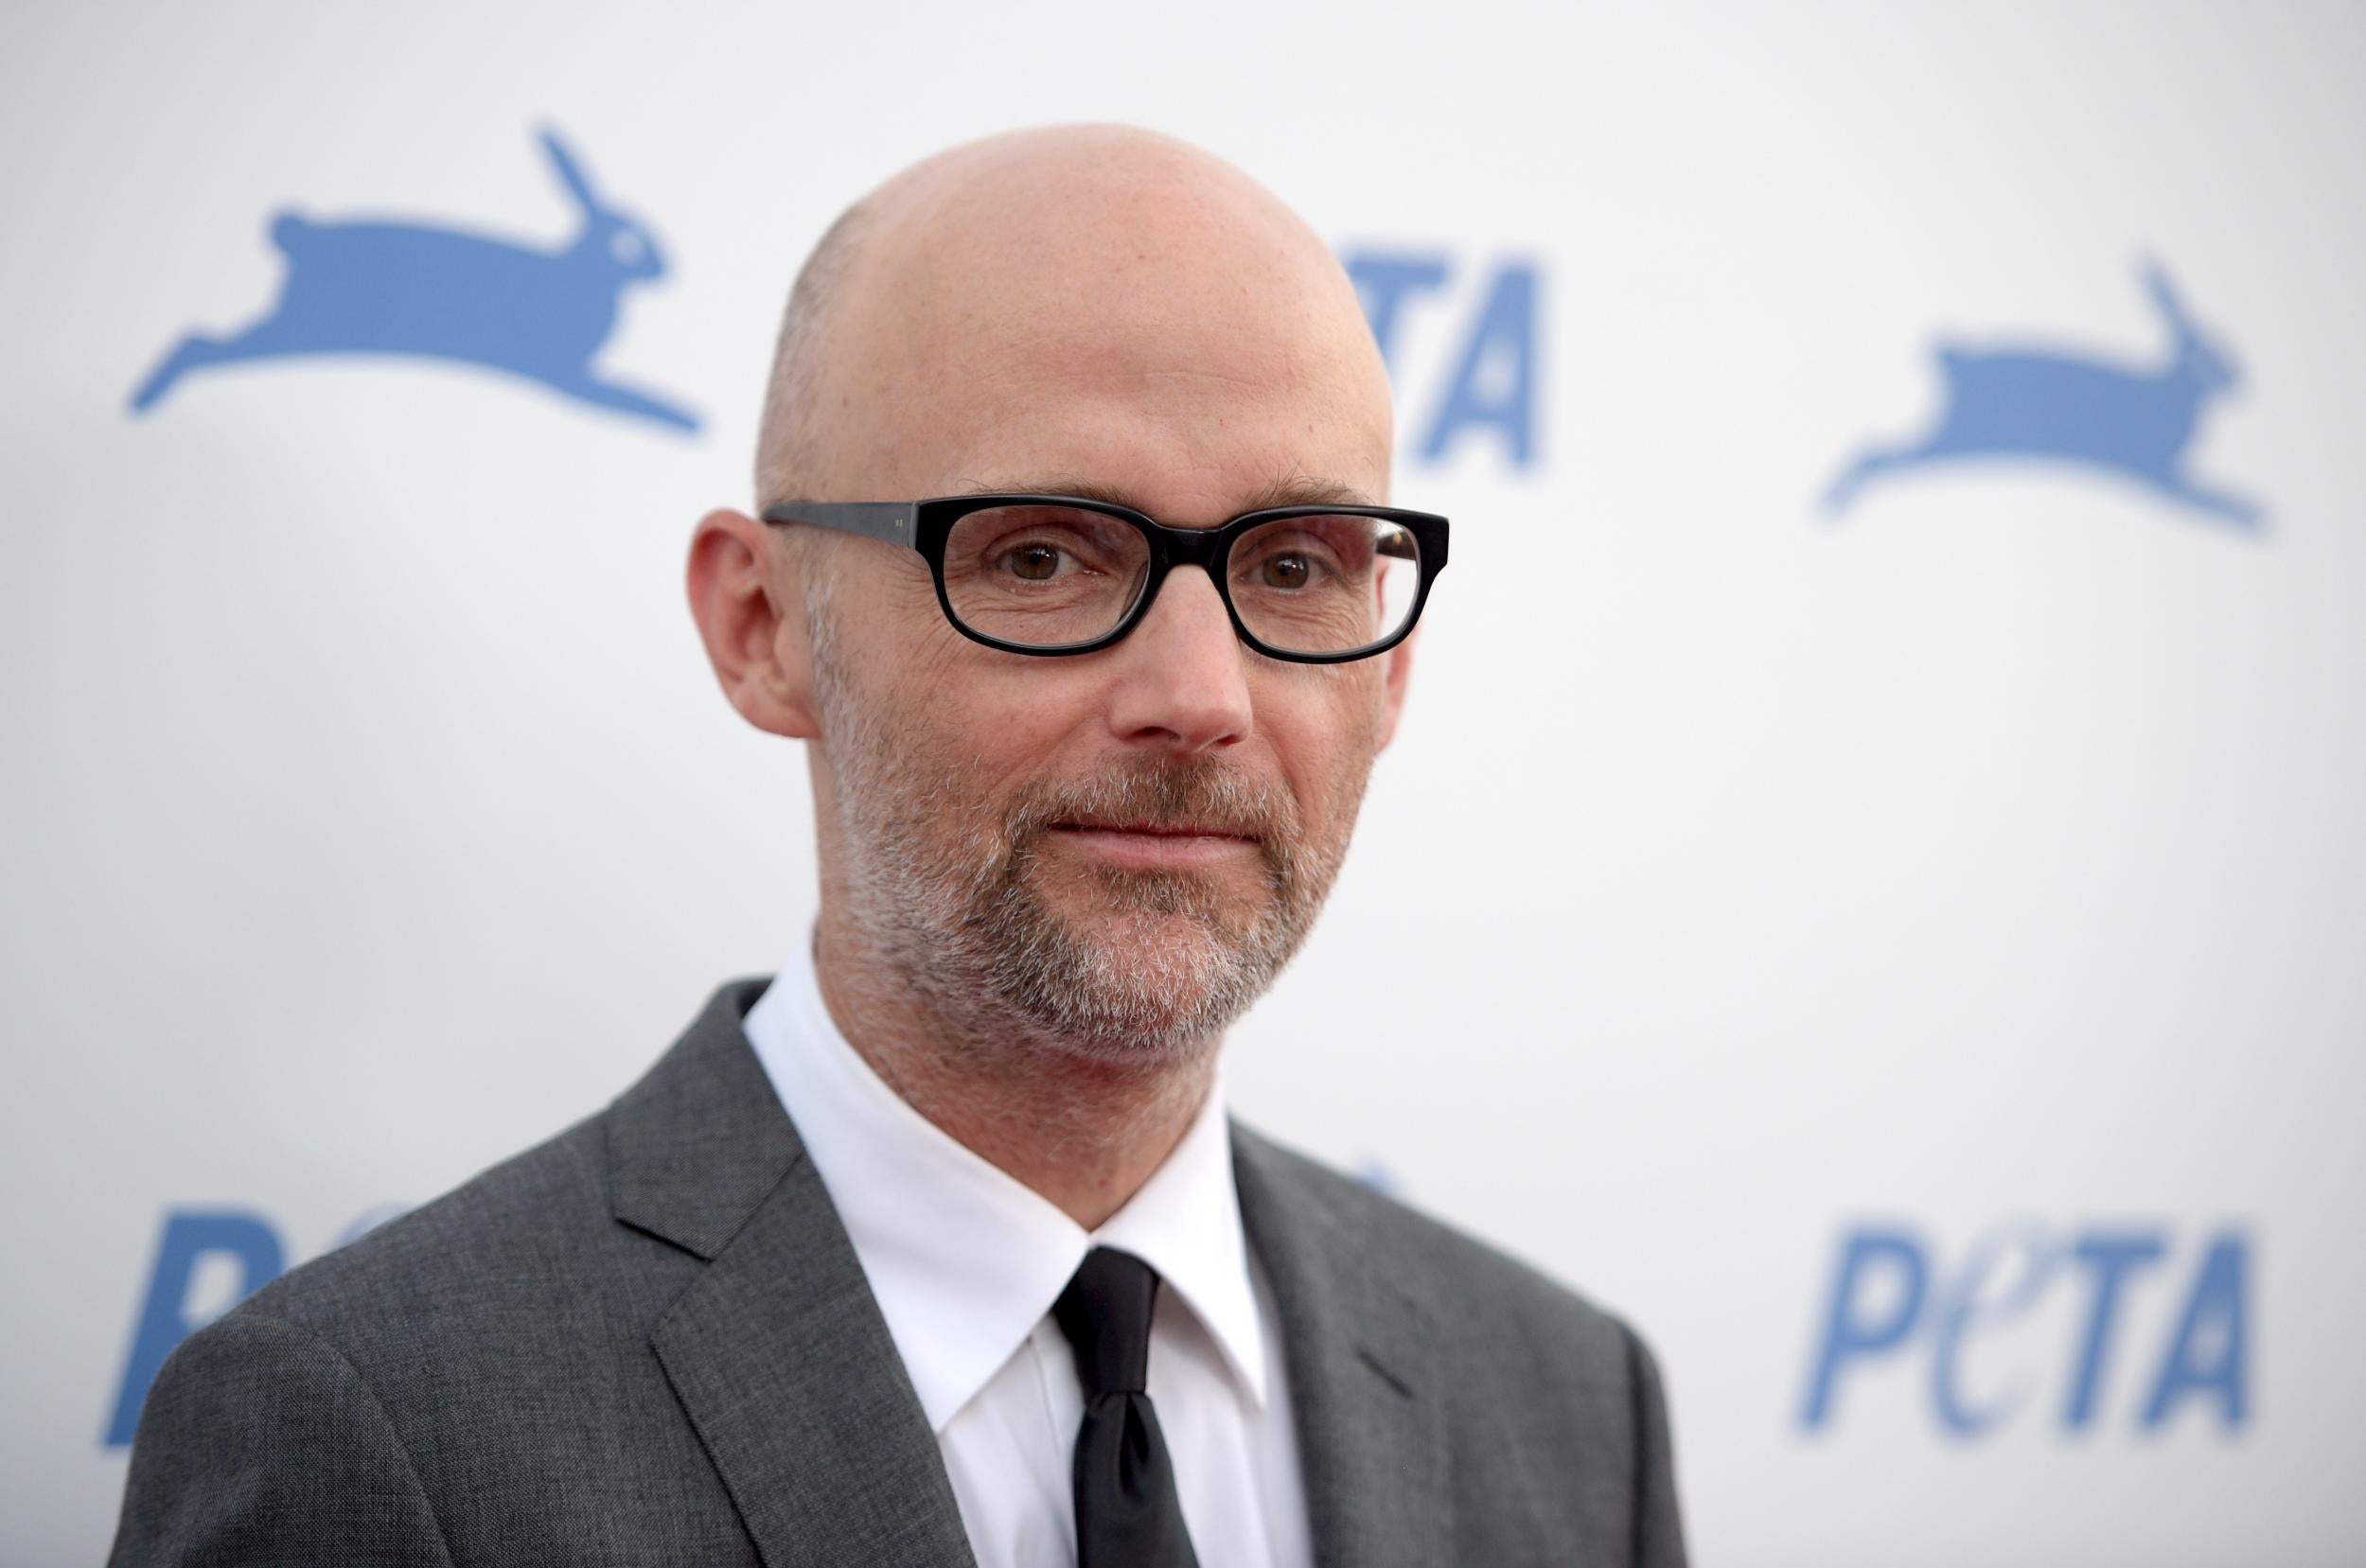 Recording artist Moby attends PETA's 35th Anniversary Party at Hollywood Palladium on September 30, 2015 in Los Angeles, California.